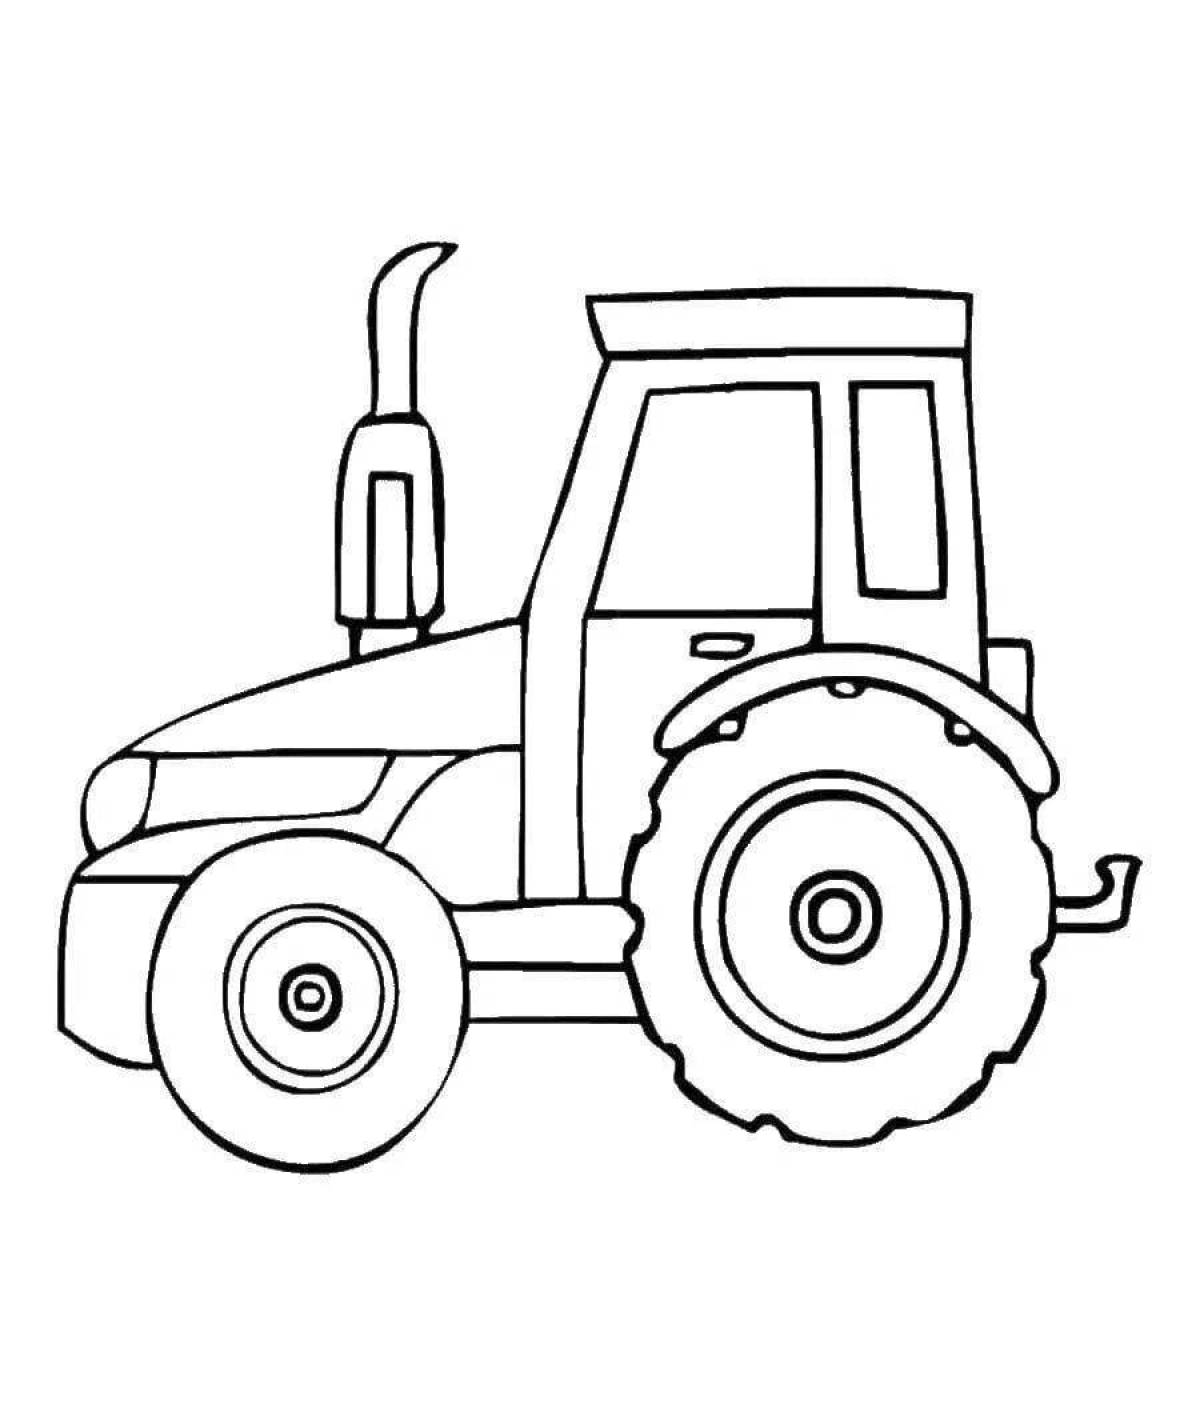 Fabulous machine tractor coloring page